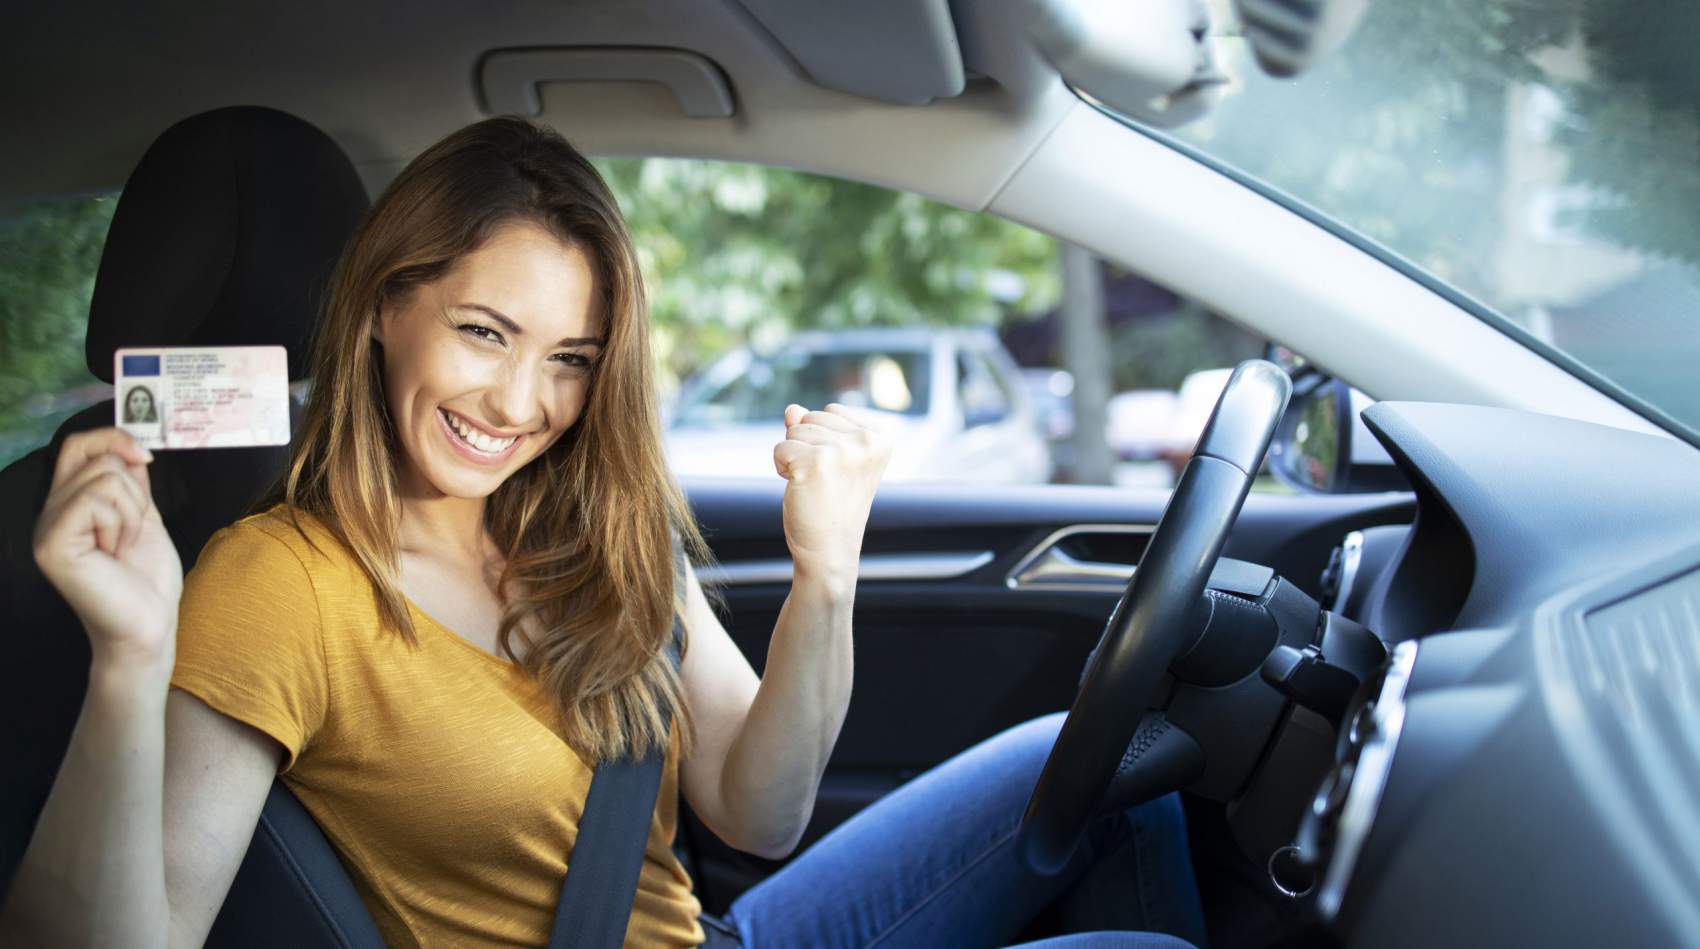 4 things to consider when choosing your driving instructor